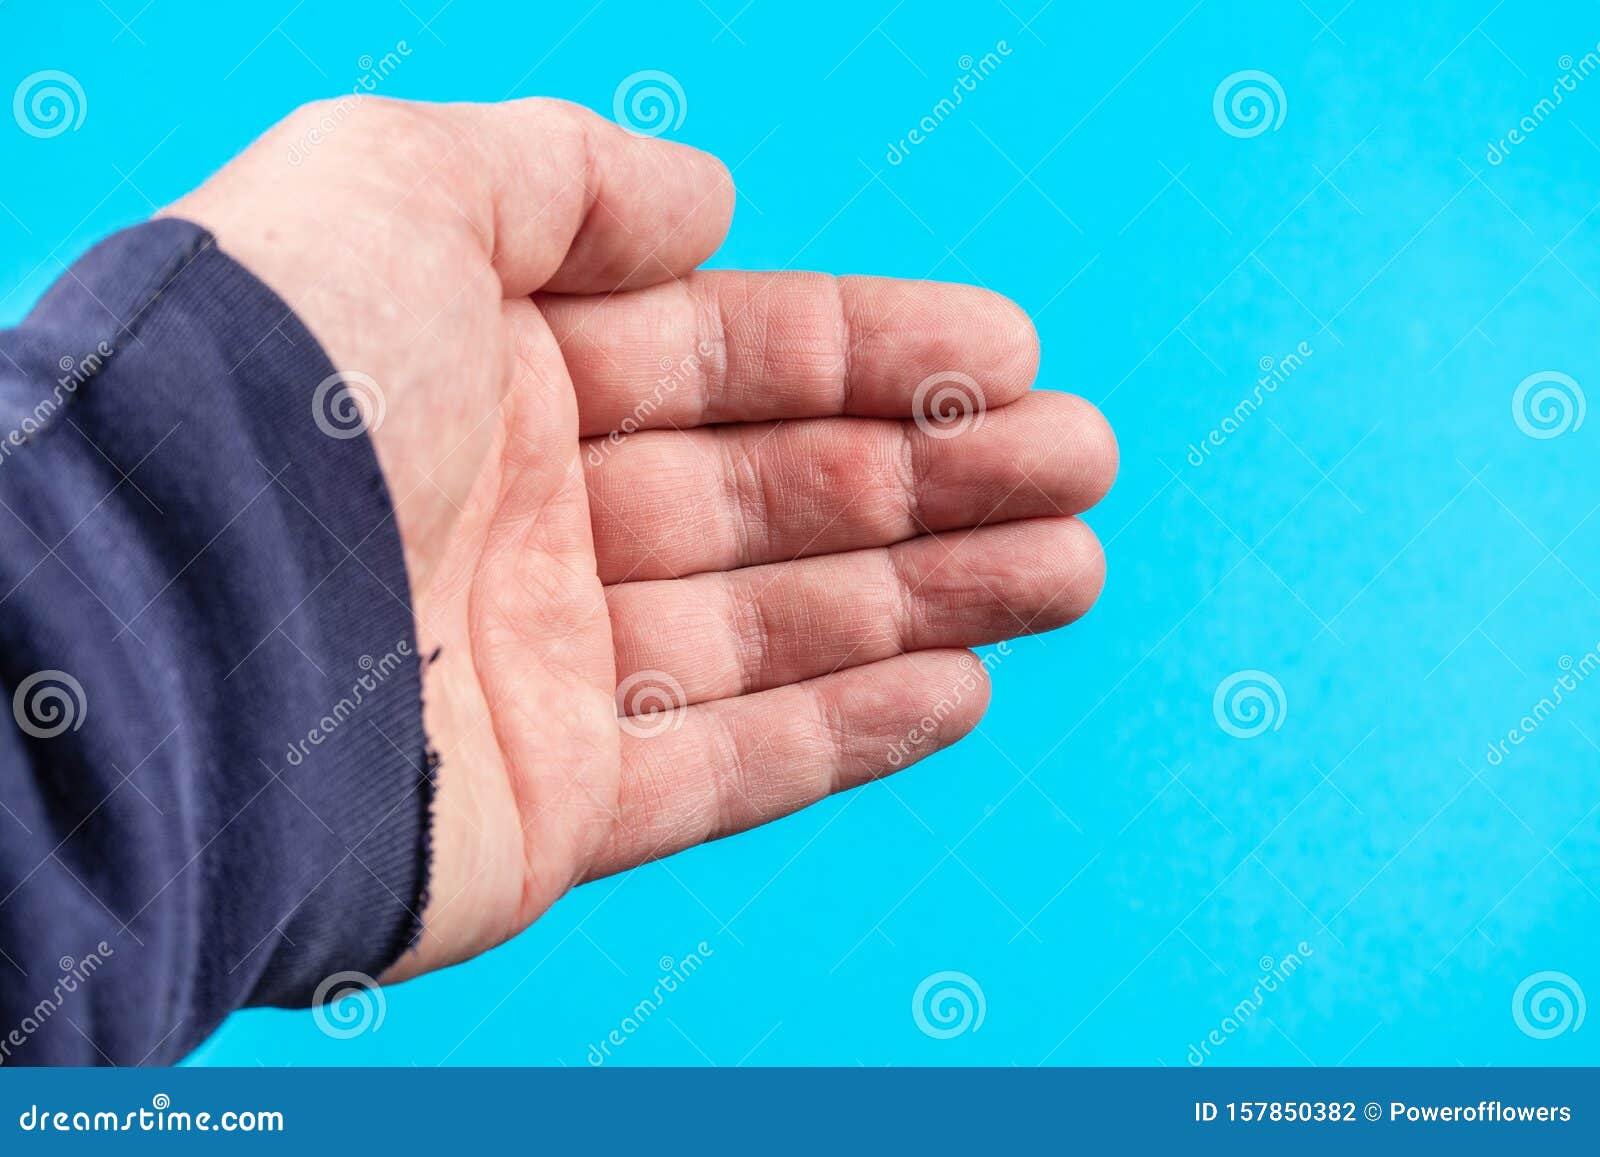 a hand is a prehensile, multi fingered appendage located at the end of the forearm or forelimb of primates such as humans,